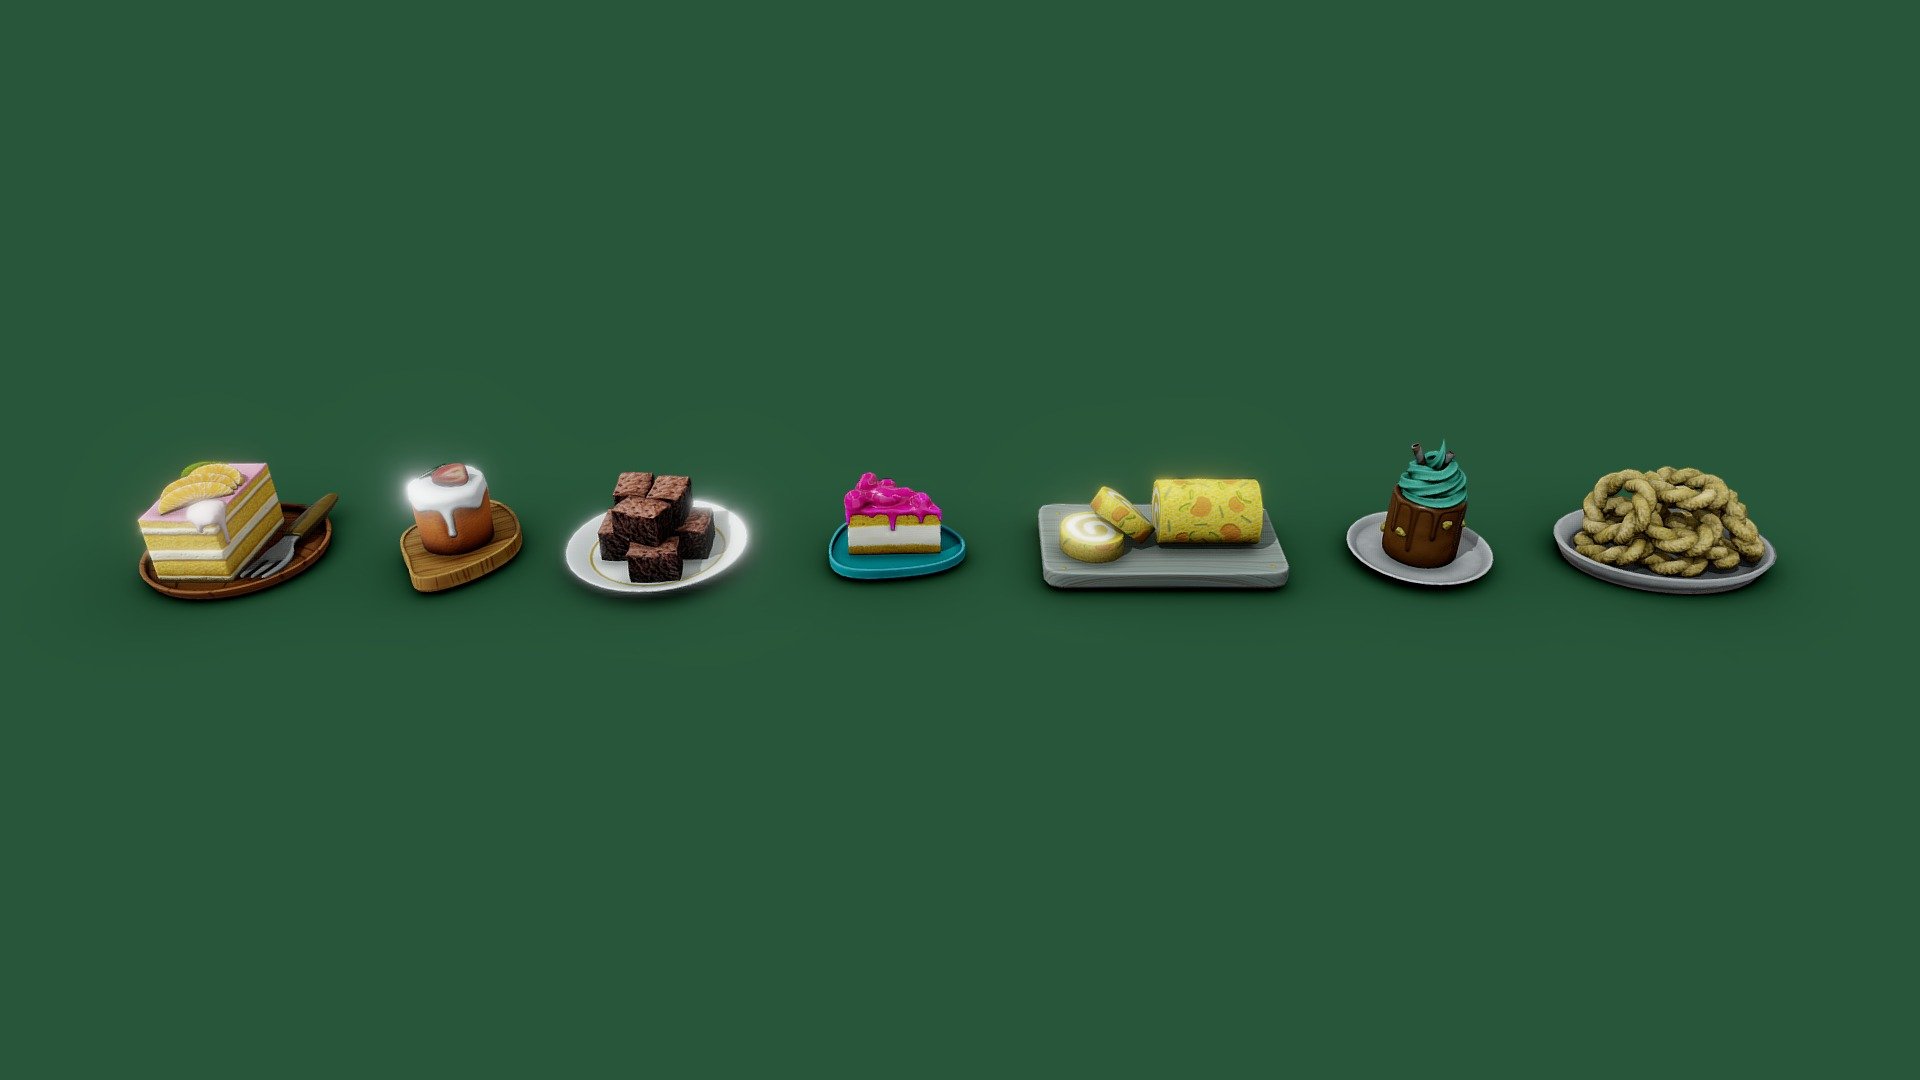 hey, i made Lowpoly Cake Food Game Asset, kind a nice for your scene. 4K texture PBR Unity smoothness and Unreal. also i have free stuff for download please cek my page account, and follow for future upload. This models is sell, so you can use in any project you working on, i cant promis the other cake or food models will be coming soon to accompanied this model but i will try. Thank you for all of you guys to supporting me ;’)

In this pack only the model, 4K texture set for unity and unreal in additional file.

looking for freelance 3D artist for your mobile game? Feel free to ask me.

oh… if you want, i post several progress in my instagram @ferozes

And check out my free game on googleplay —&gt; https://bit.ly/2FRlptH

thank you for supporting me again, have nice scene :D - Lowpoly Cake Food Game Ready Asset Pack #1 - Buy Royalty Free 3D model by ferofluid 3d model